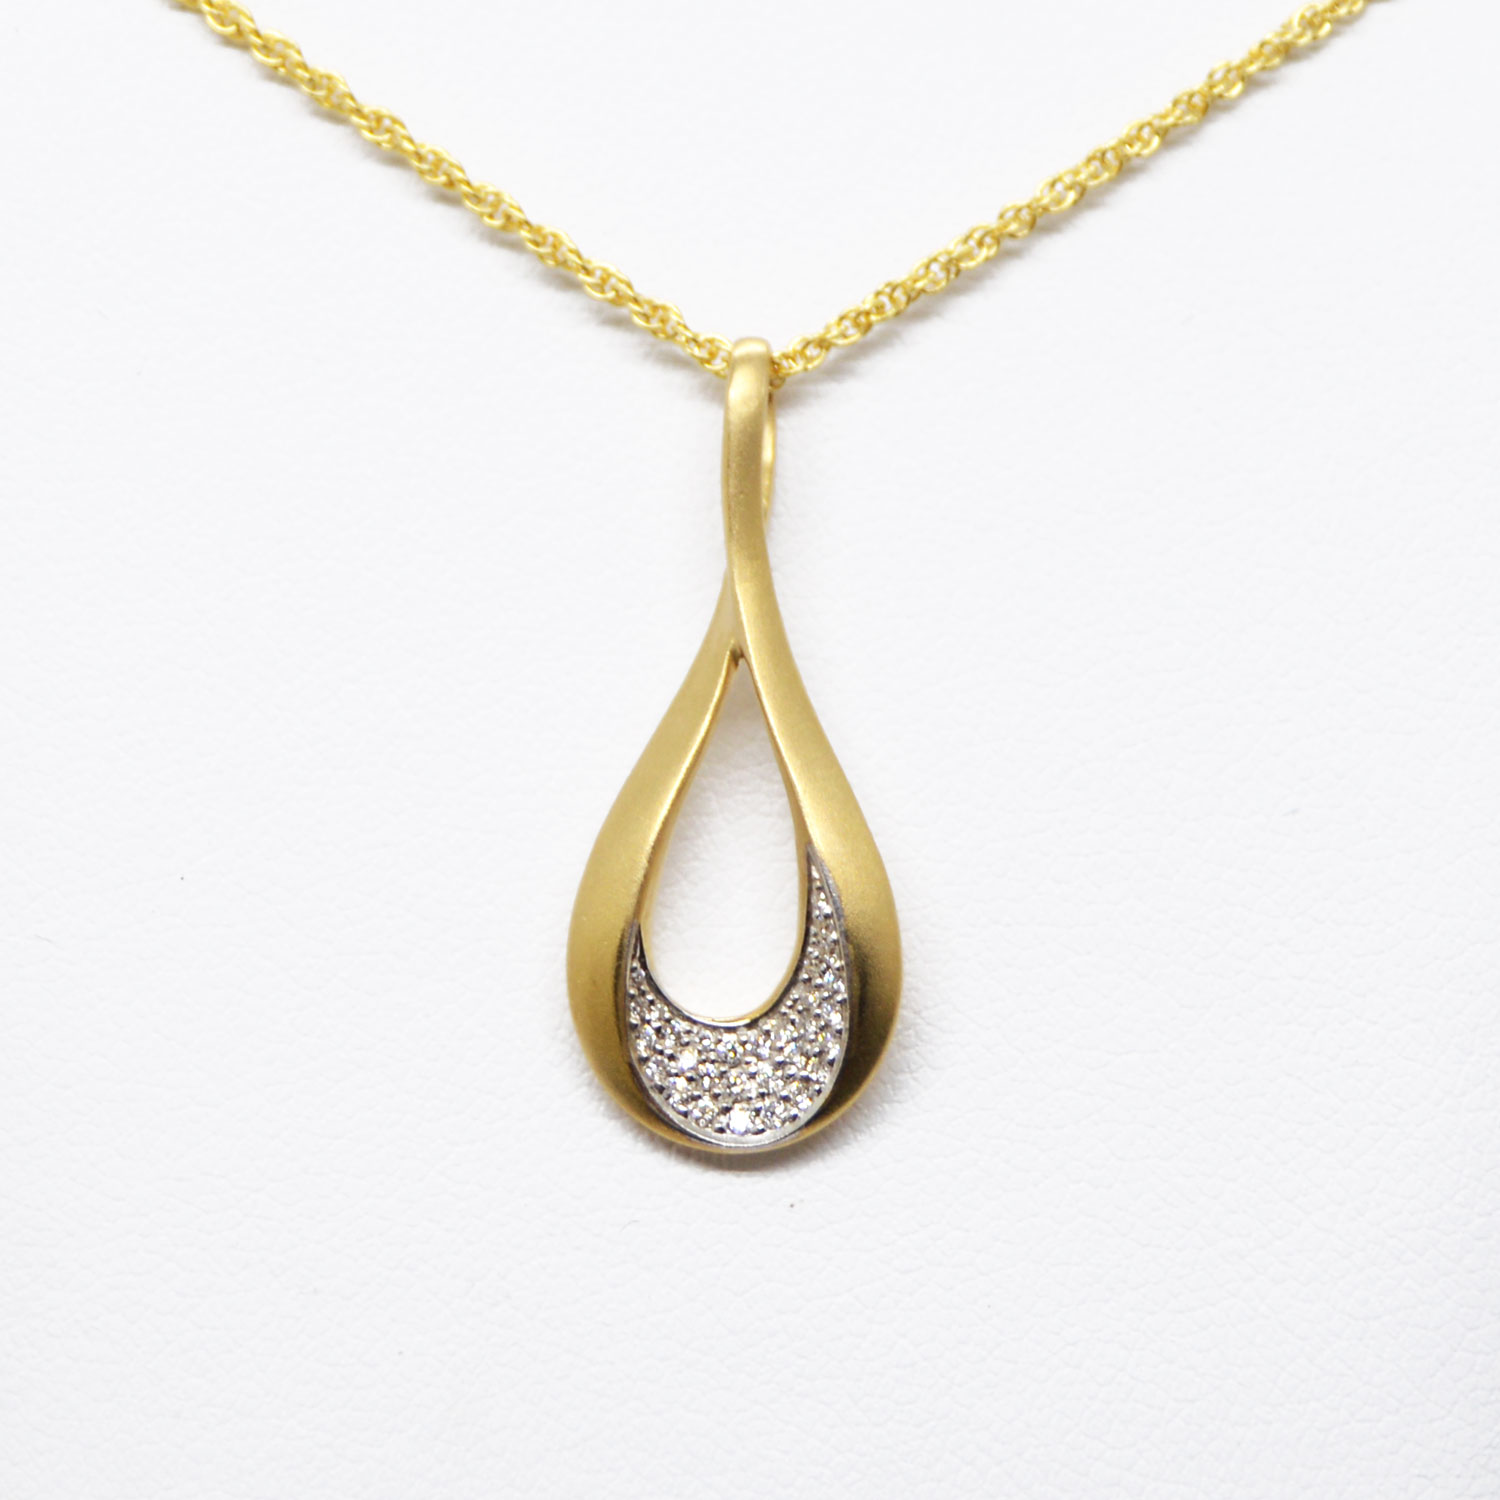 Allison Kaufman necklace with pave set diamonds in yellow gold satin finish